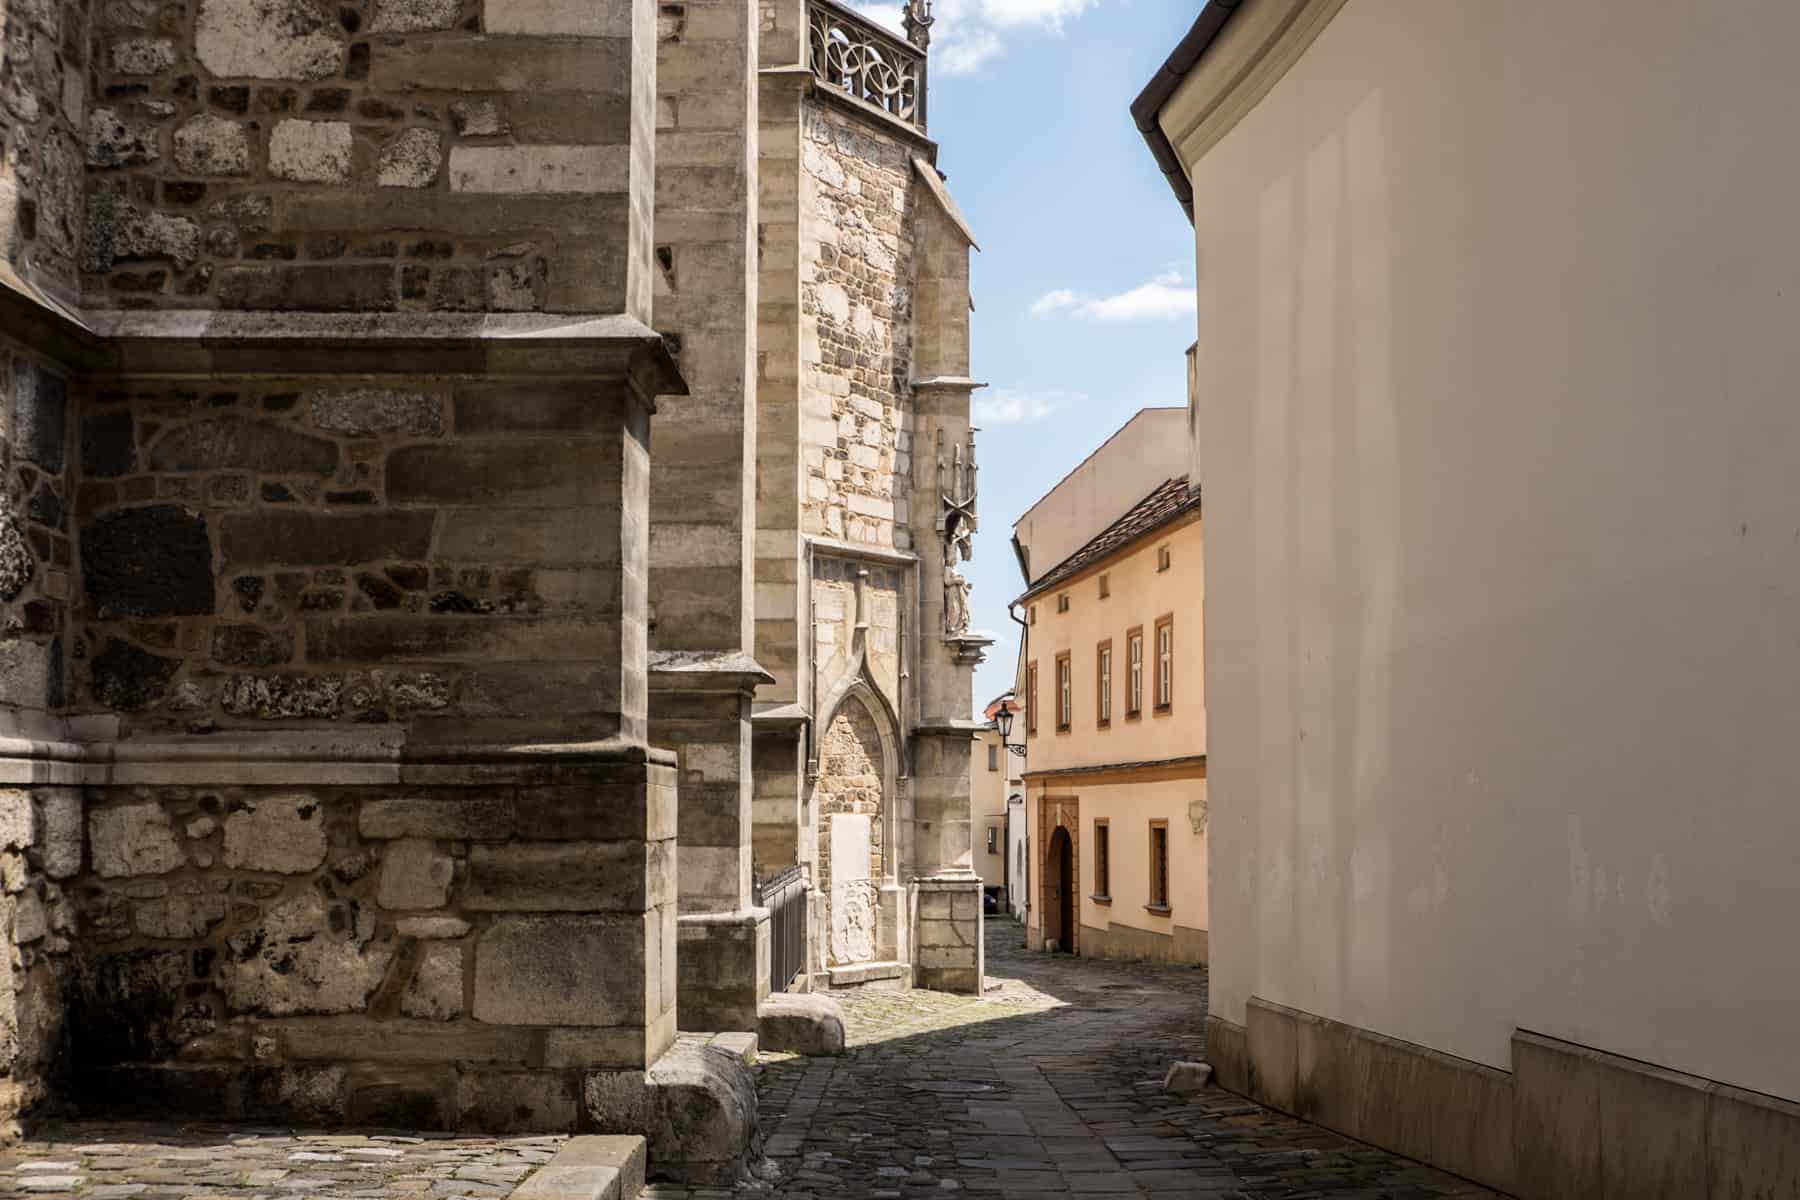 The cobblestone streets next to the old stone Cathedral of St James and St Paul (left) and old low-rise buildings (right) in Brno. 